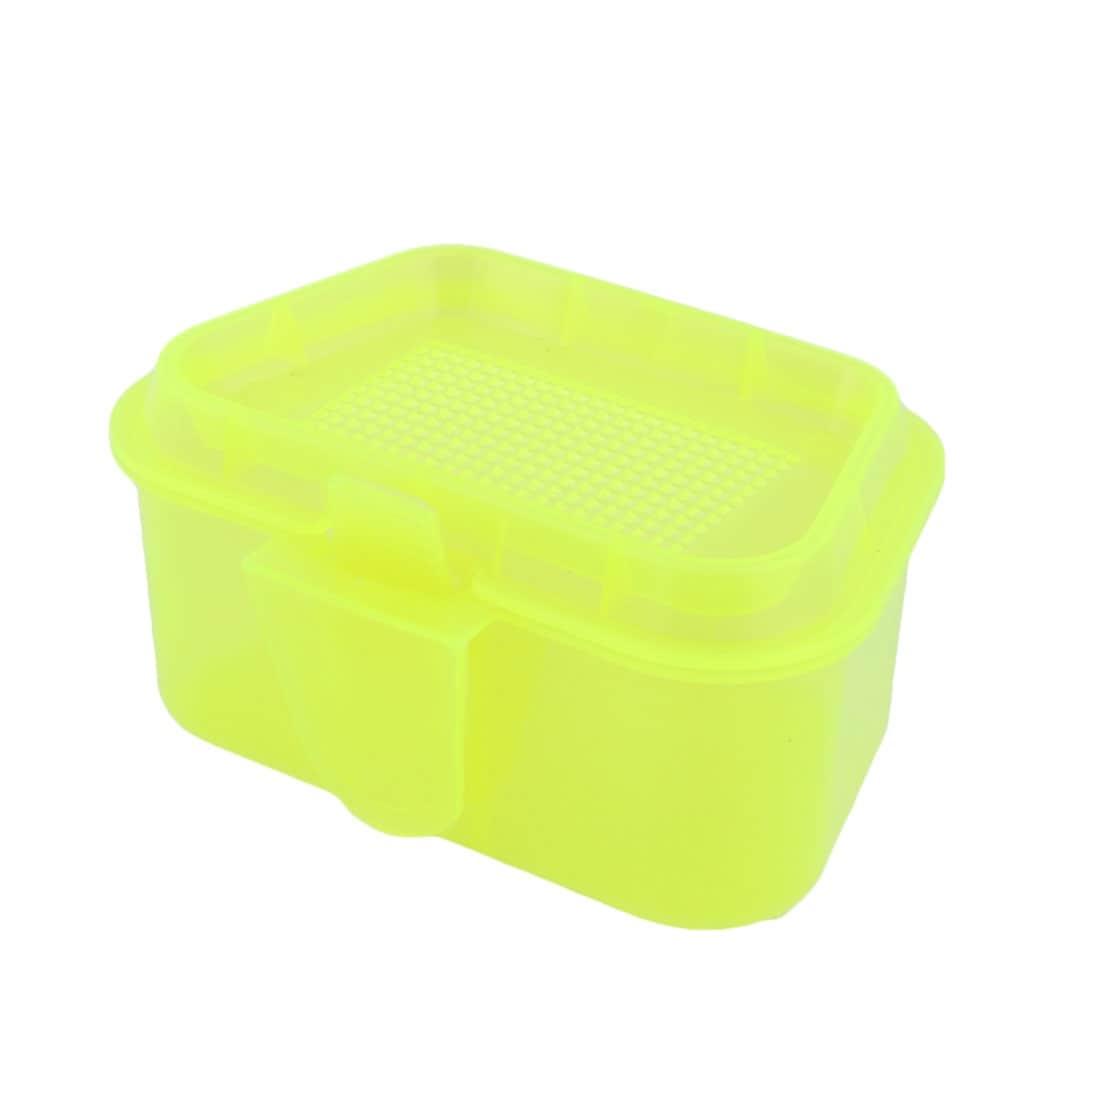 Outdoor Plastic Trapezoid Shape Fishing Bait Storage Case Container Box  Yellow - Bed Bath & Beyond - 17627160